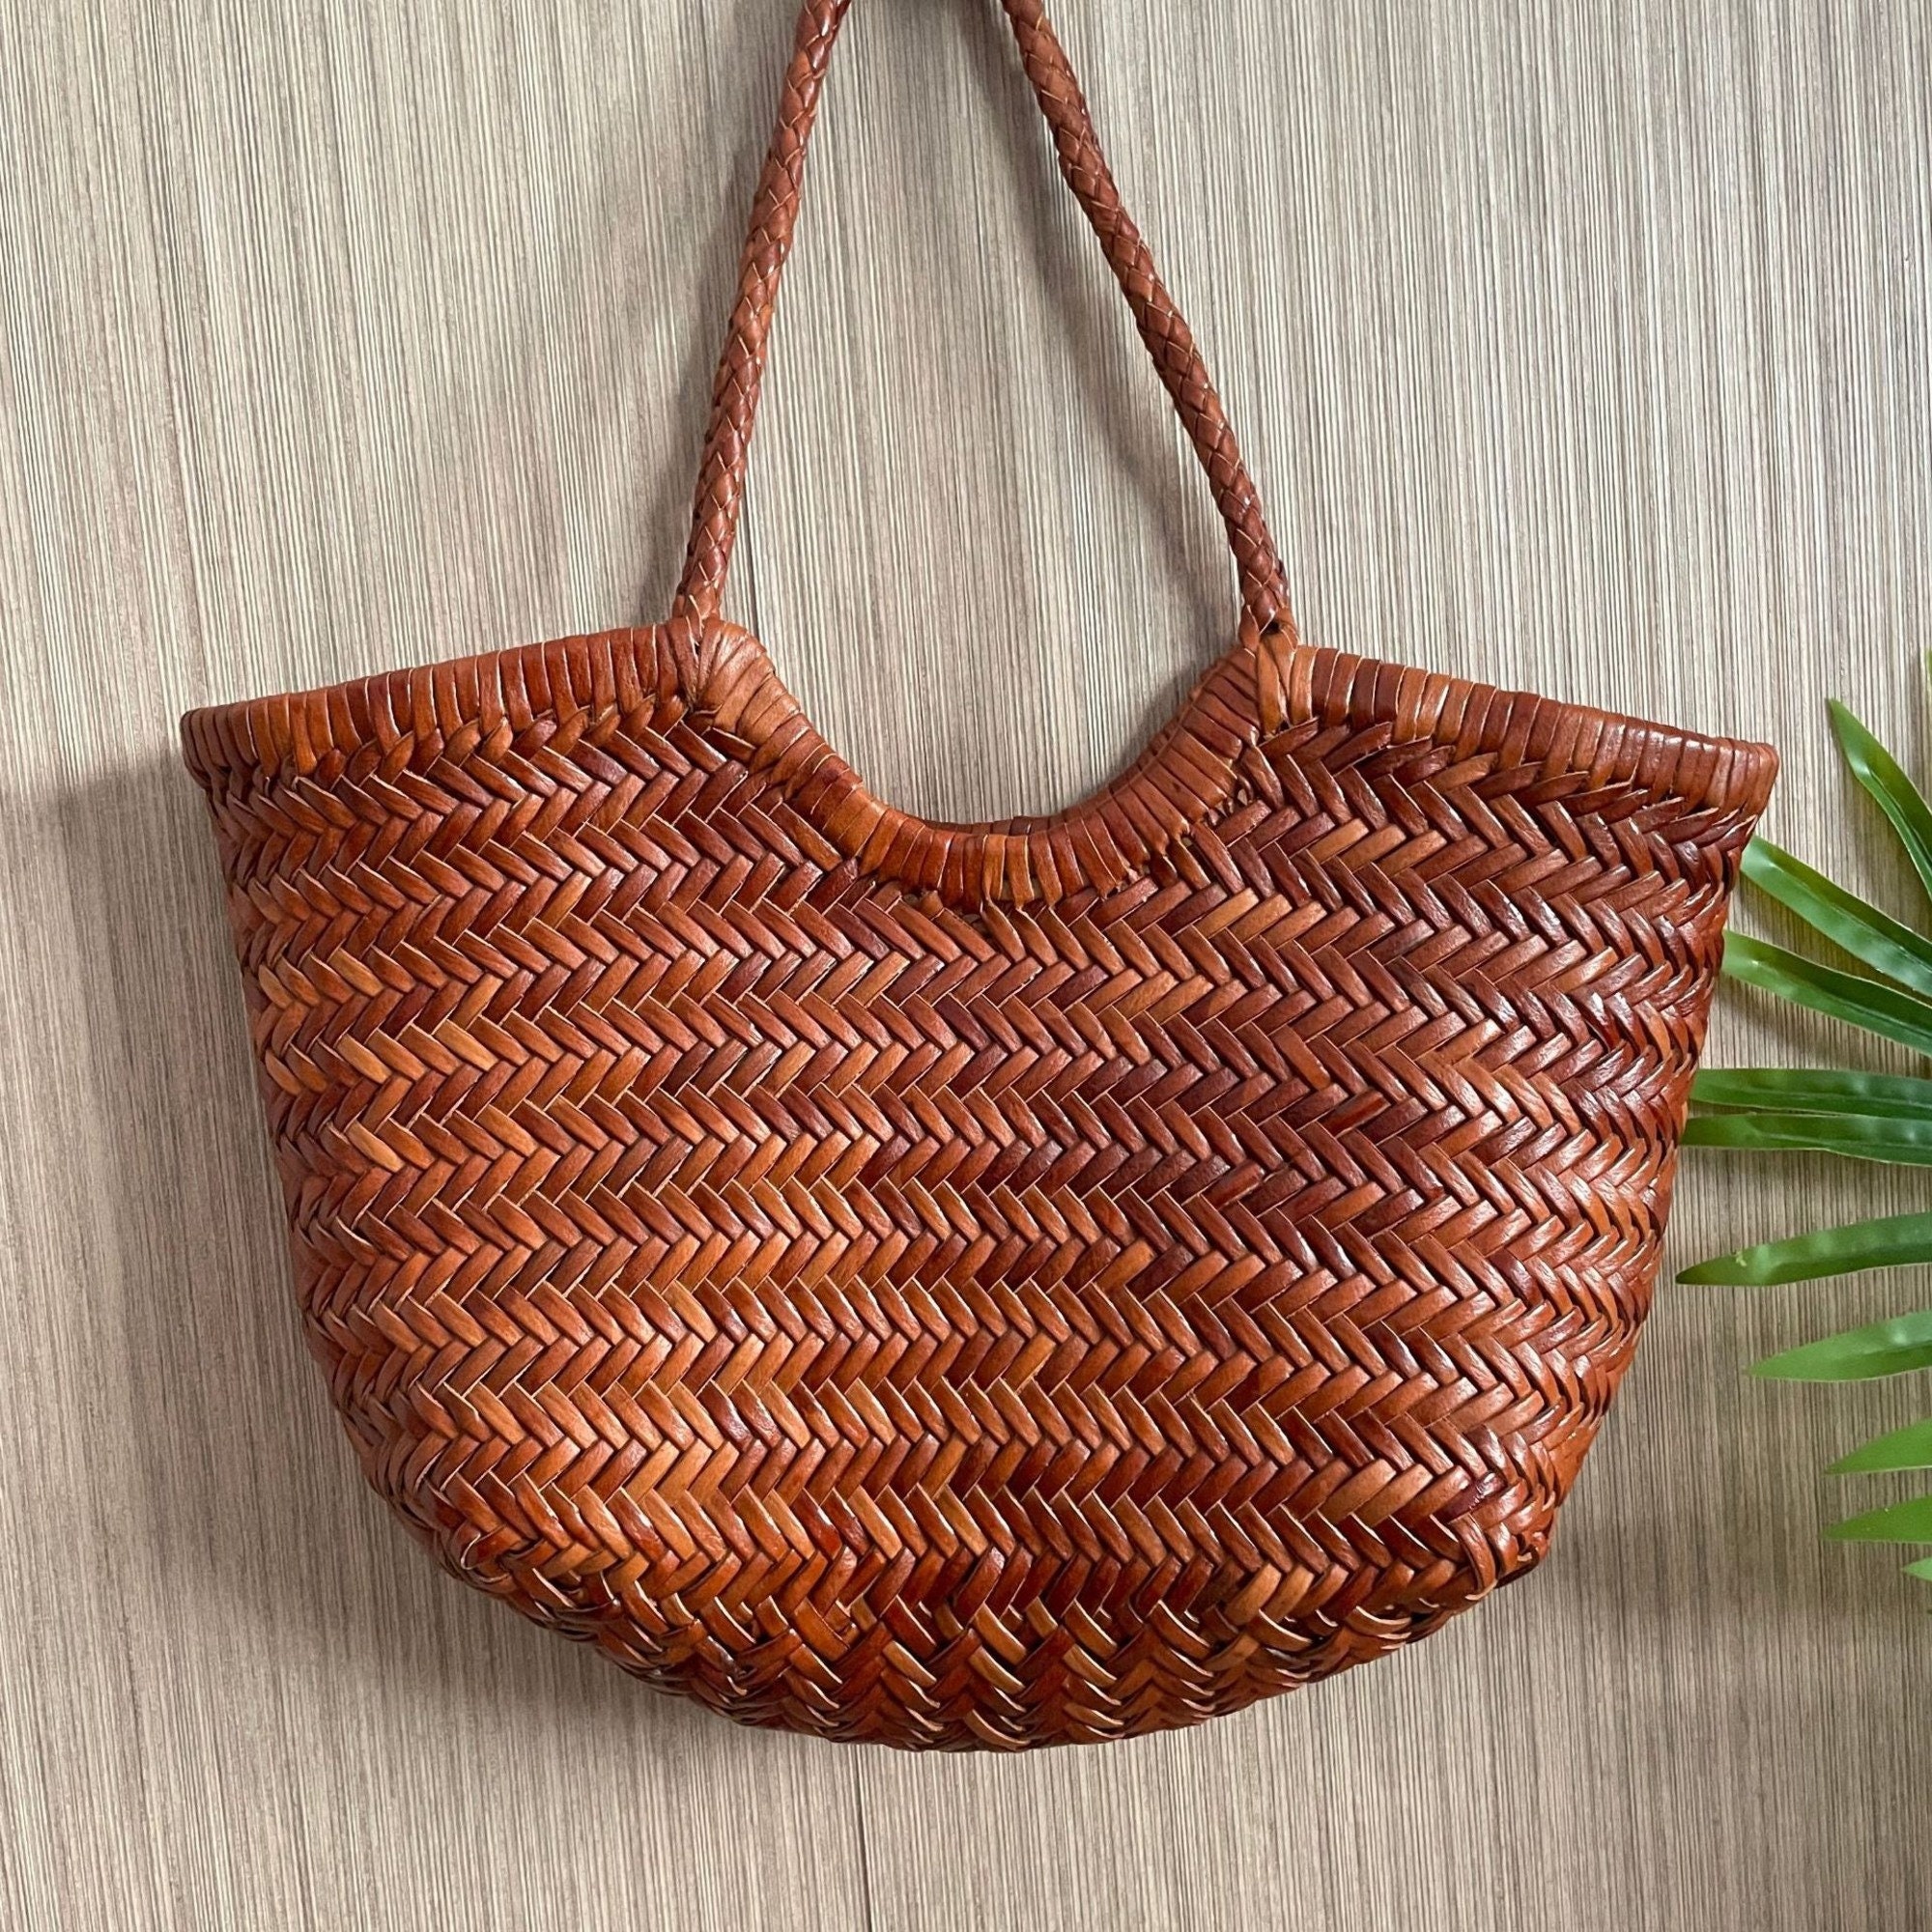 Dragon Diffusion Genuine Leather French Woven Bag Vegetable 